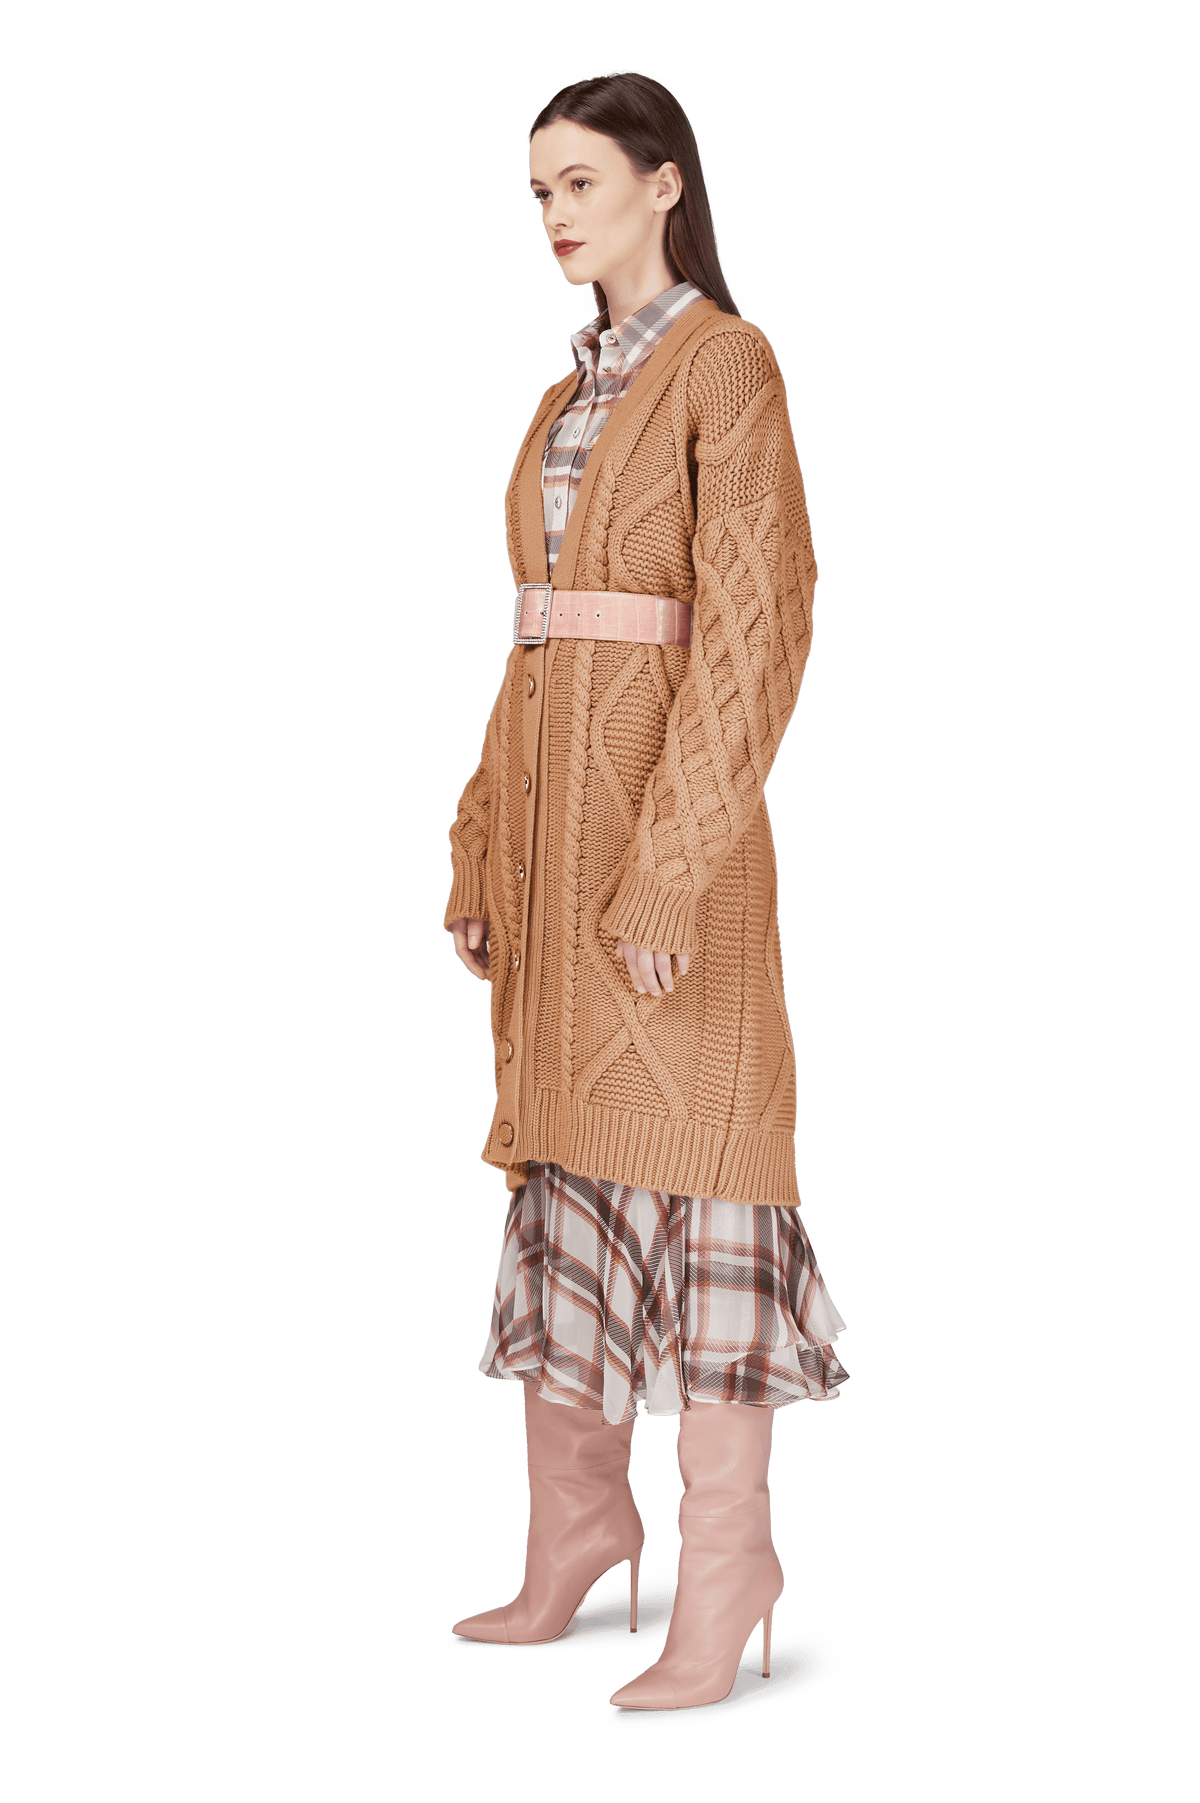 Camel Cashmere Chunky Cable Knit Cardigan